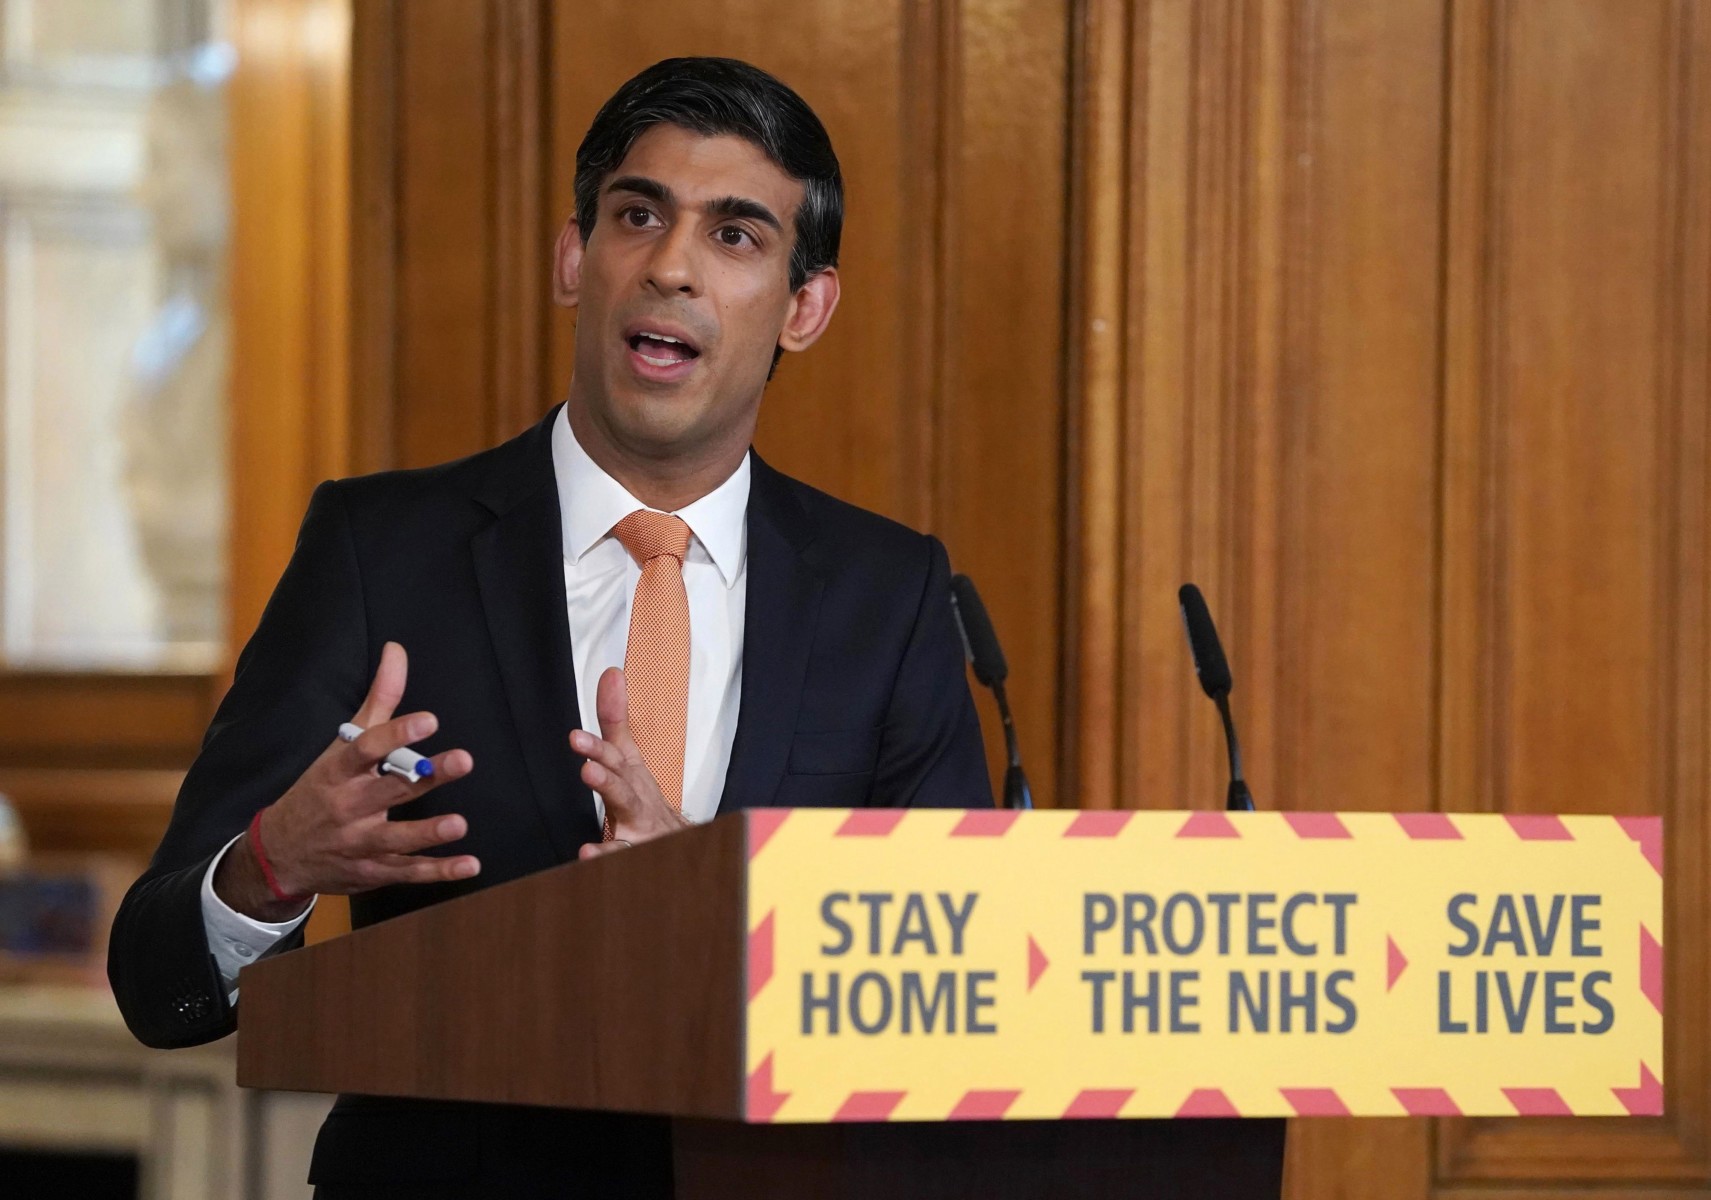 Chancellor Rishi Sunak slapped down demands for a timeline to end the lockdown